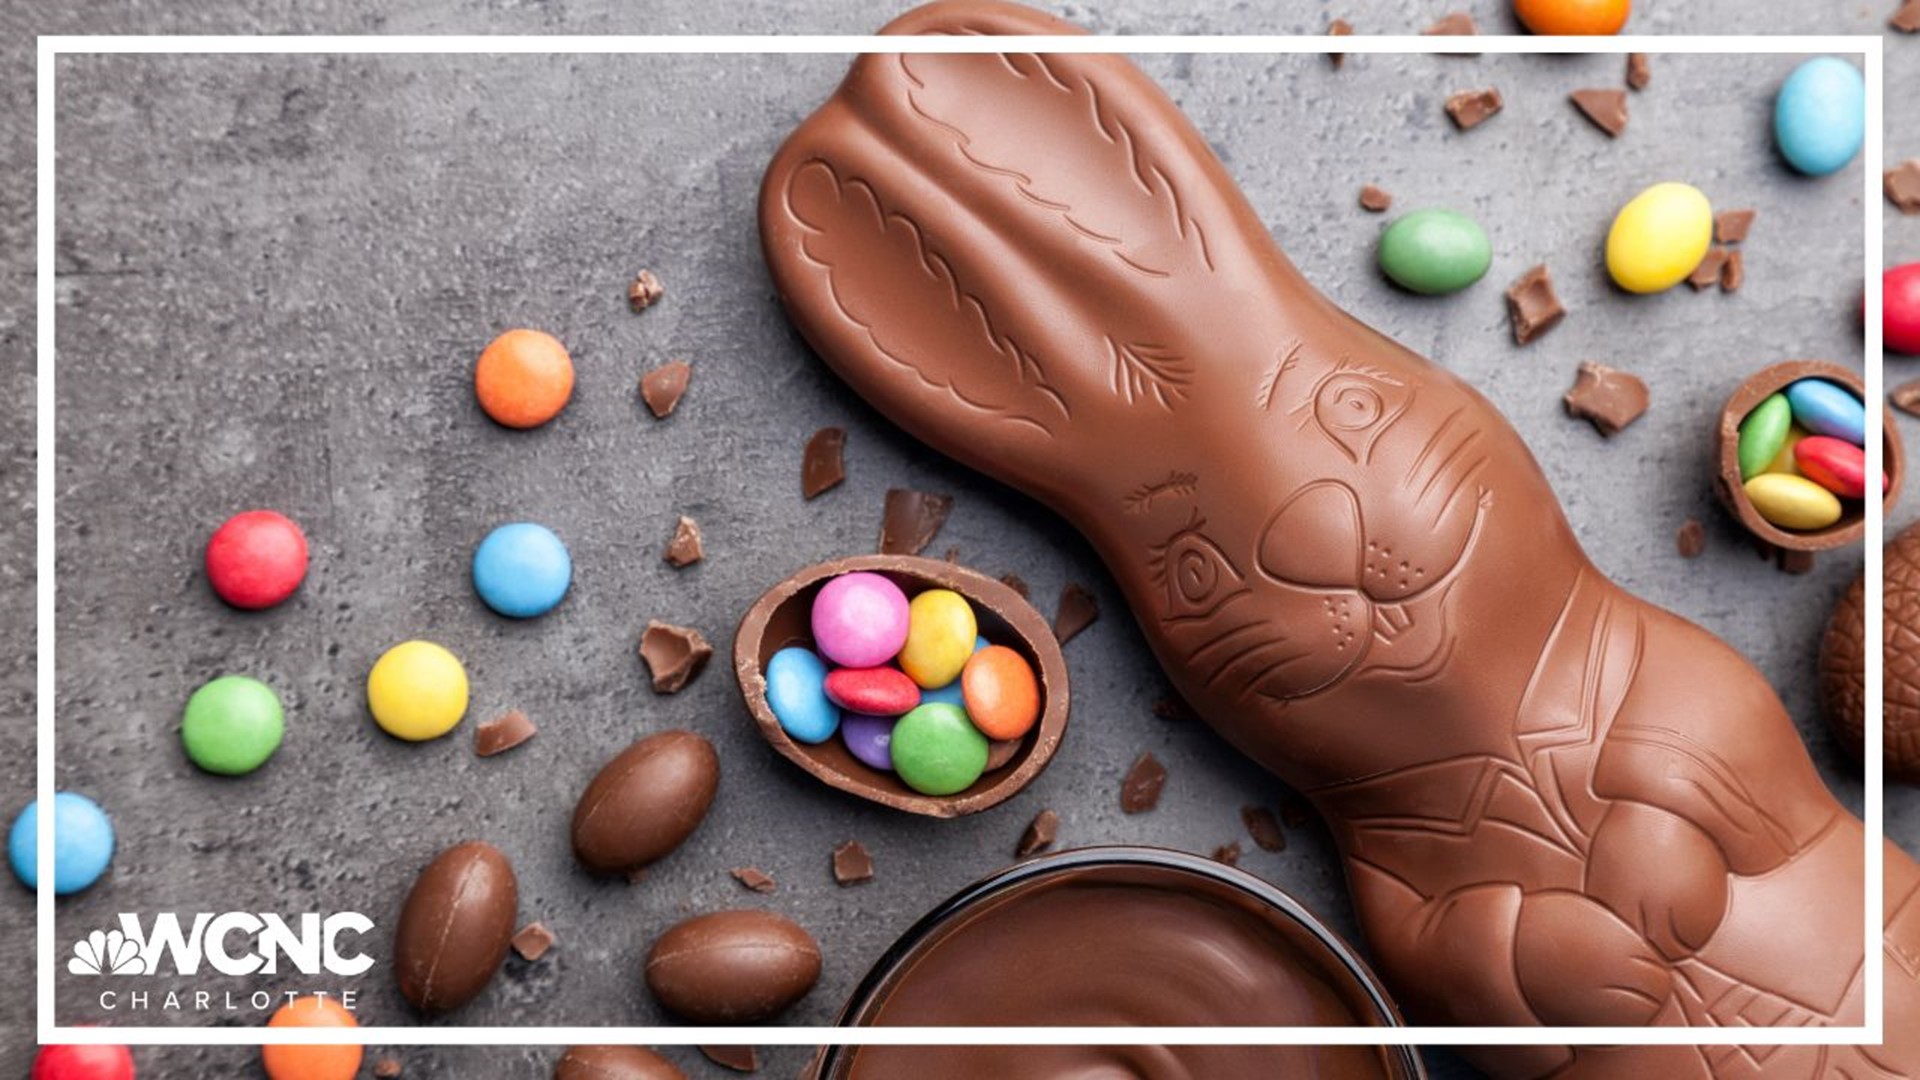 Shoppers are expected to spend more than $3 billion on Easter candy this holiday.